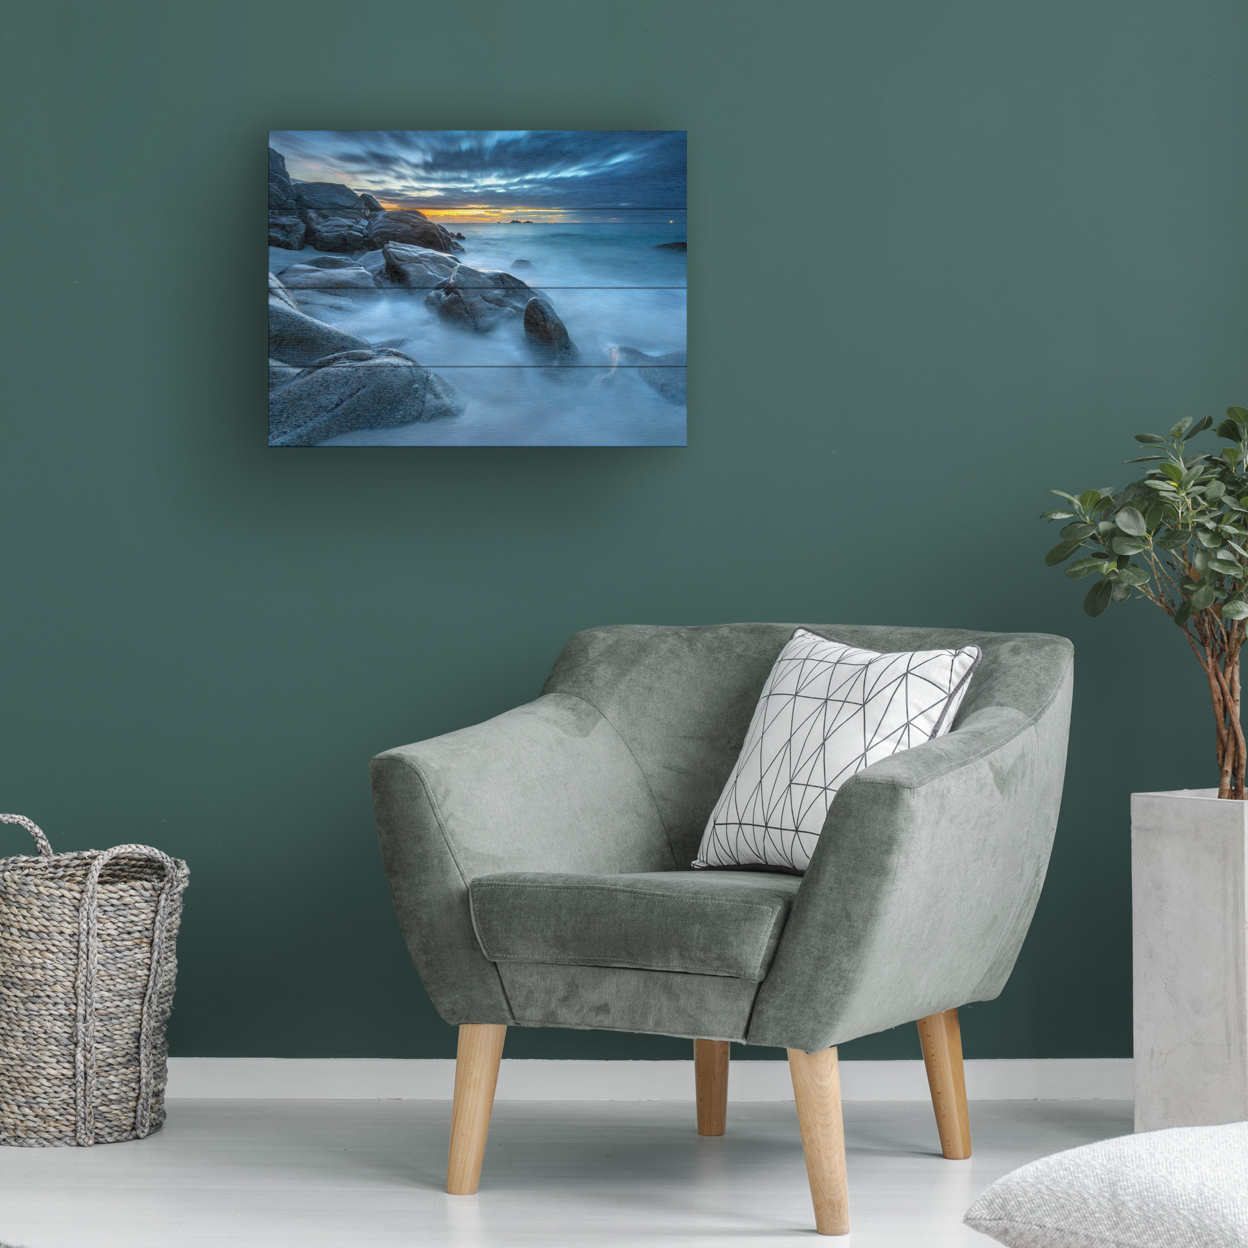 Wall Art 12 X 16 Inches Titled Blue Hour For A Blue Ocean Ready To Hang Printed On Wooden Planks